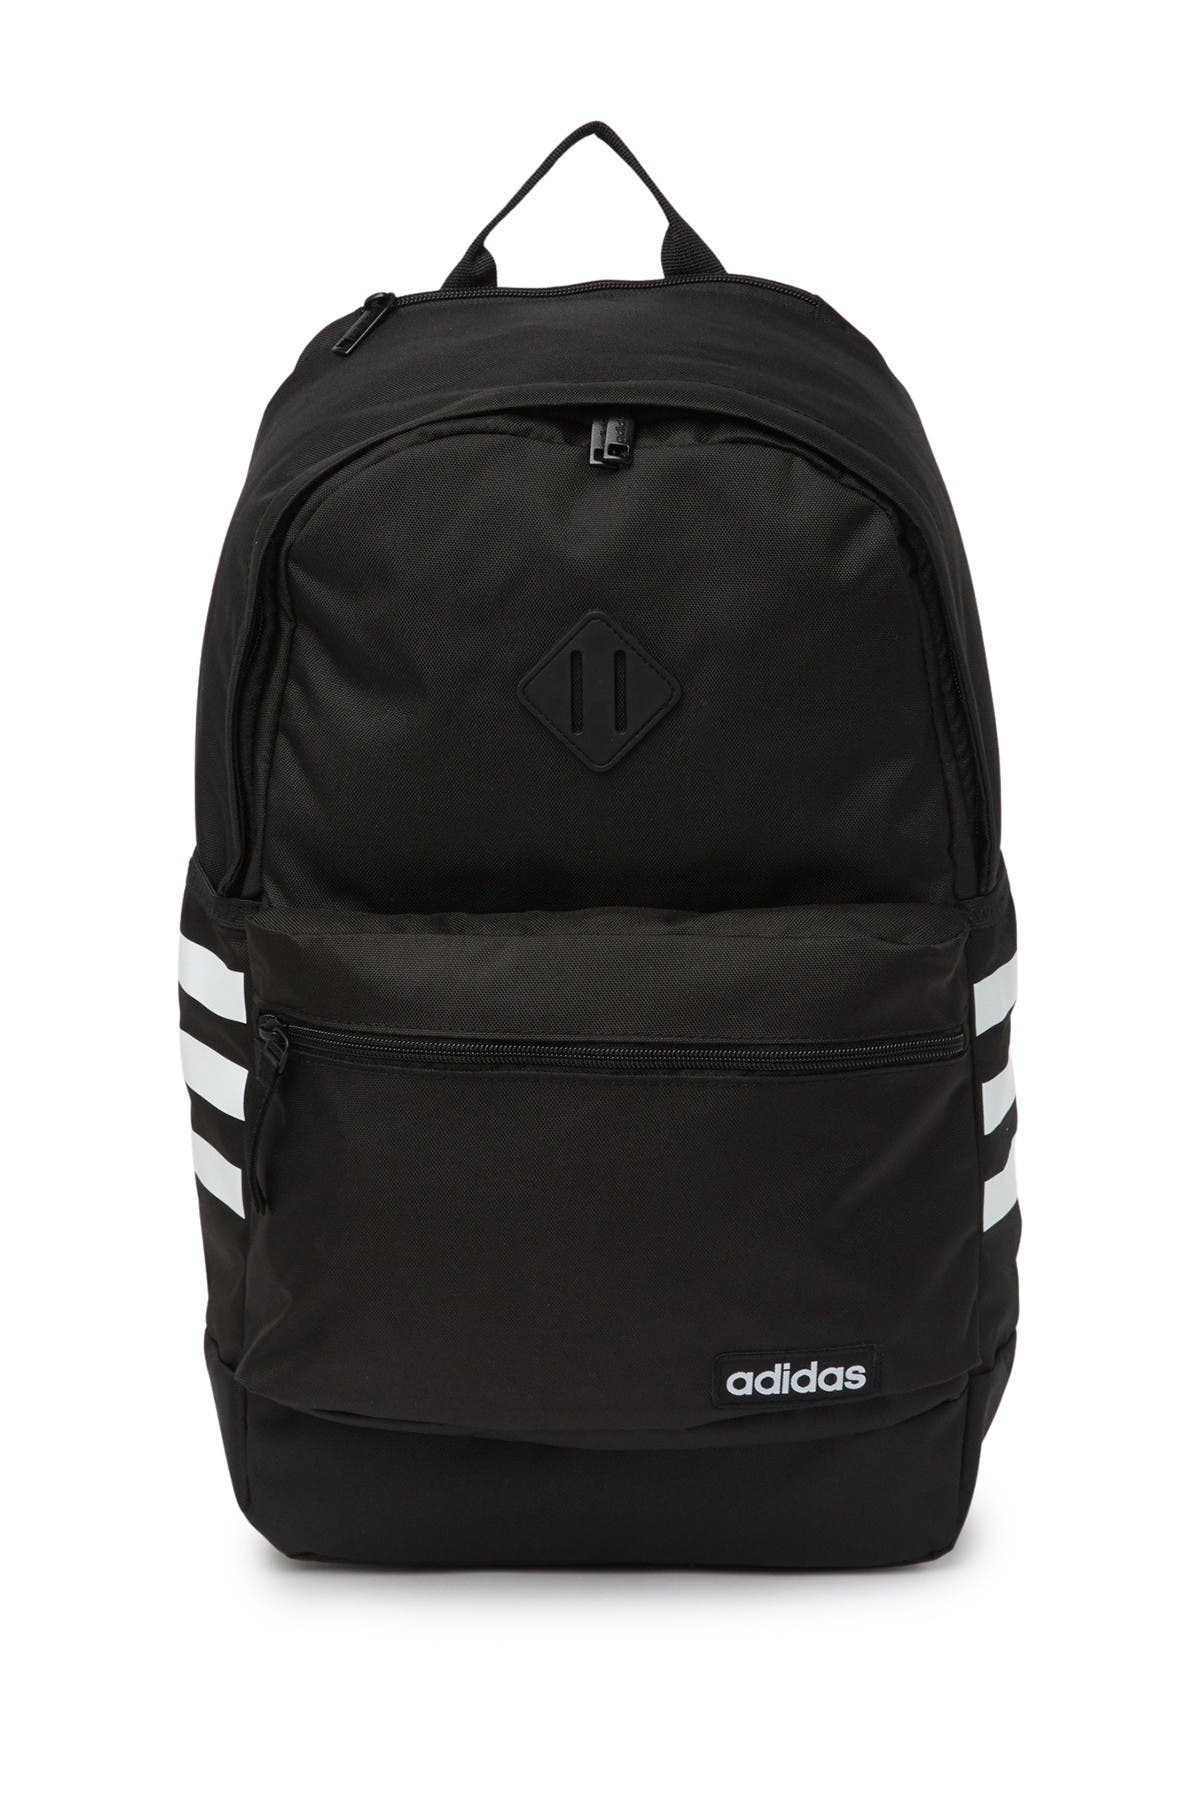 adidas classic 3s backpack black